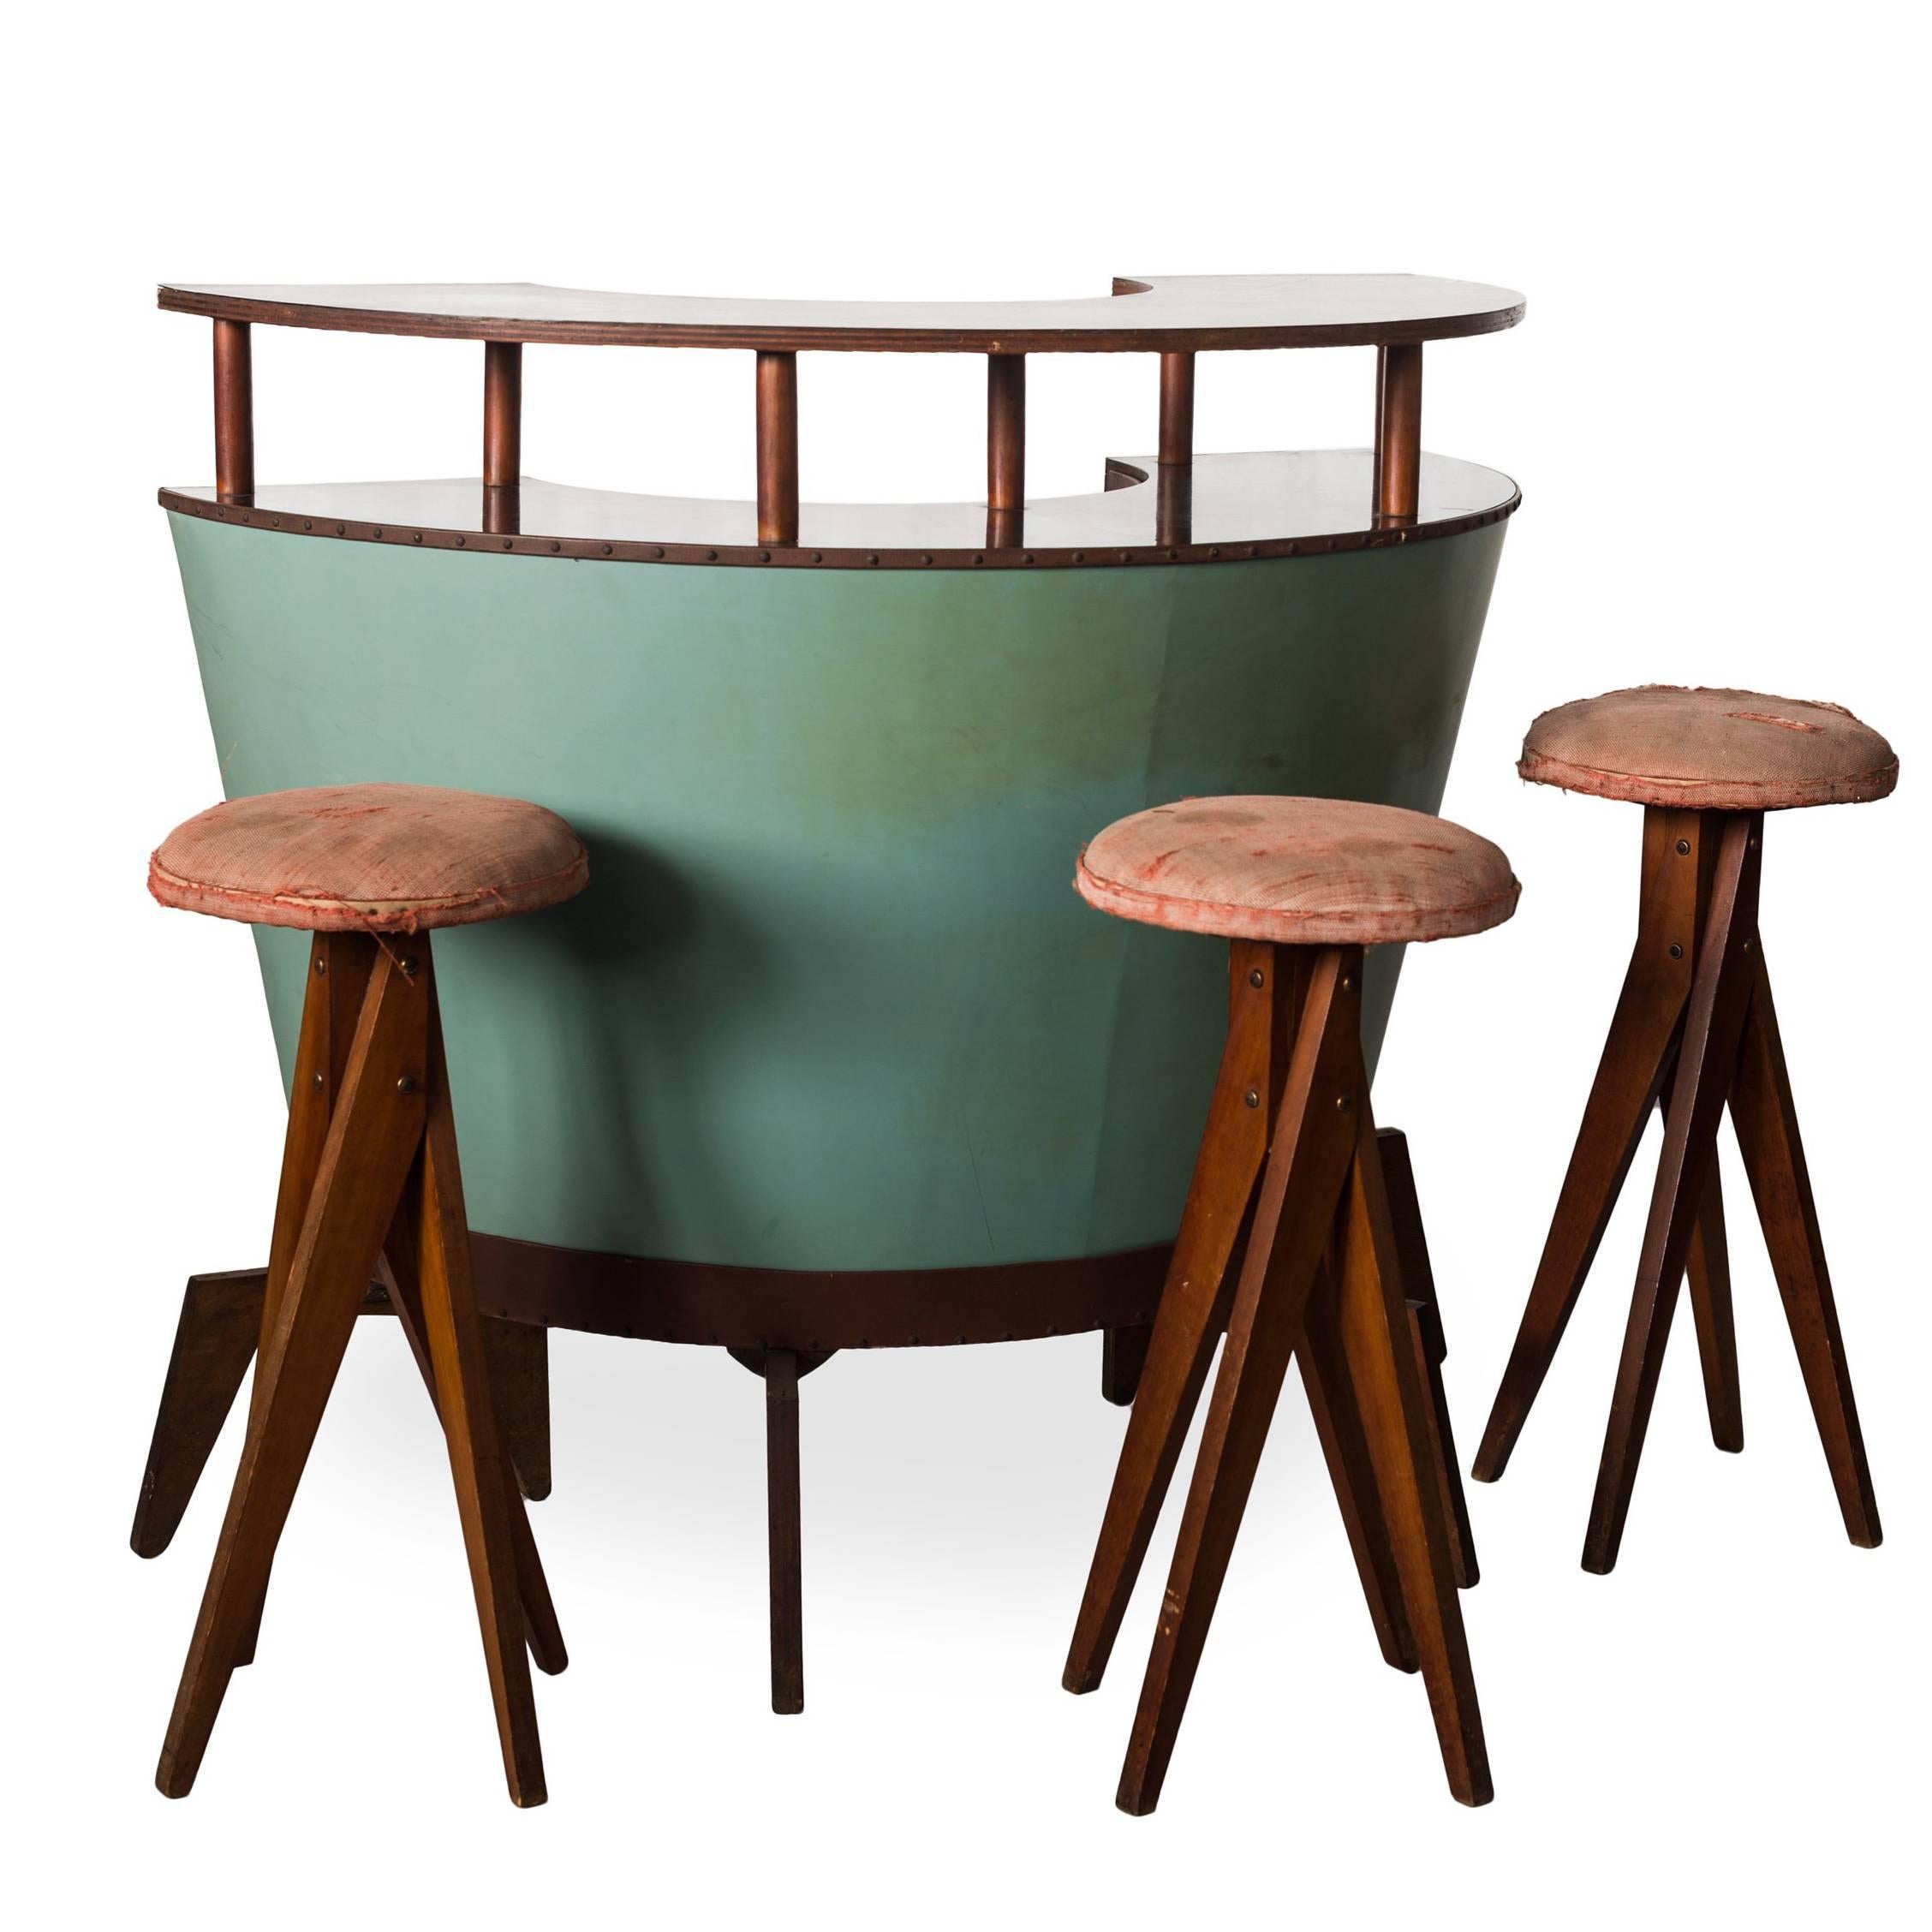 Set of Midcentury brazilian Bar with Benches by Zanine Caldas, 1940s